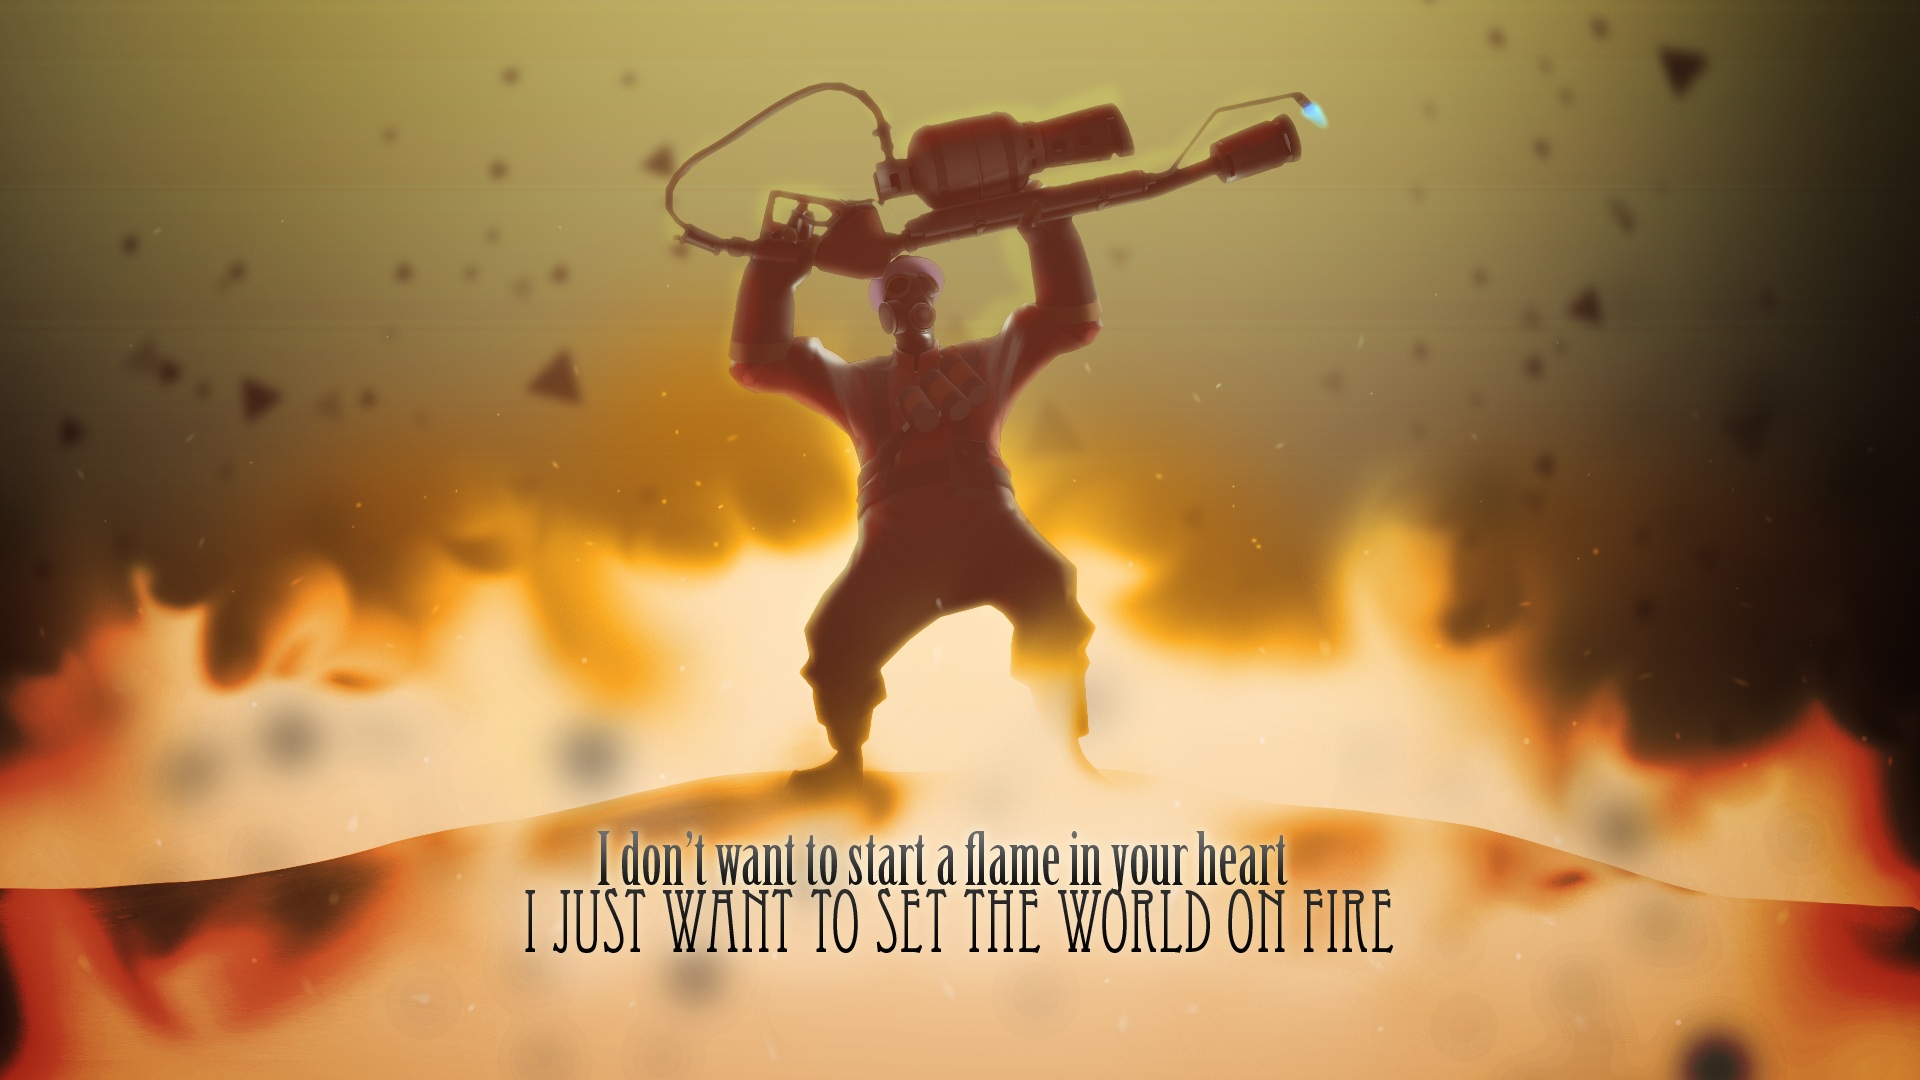 Team Fortress 2 Pyro Character Flamethrower PC Gaming 1920x1080